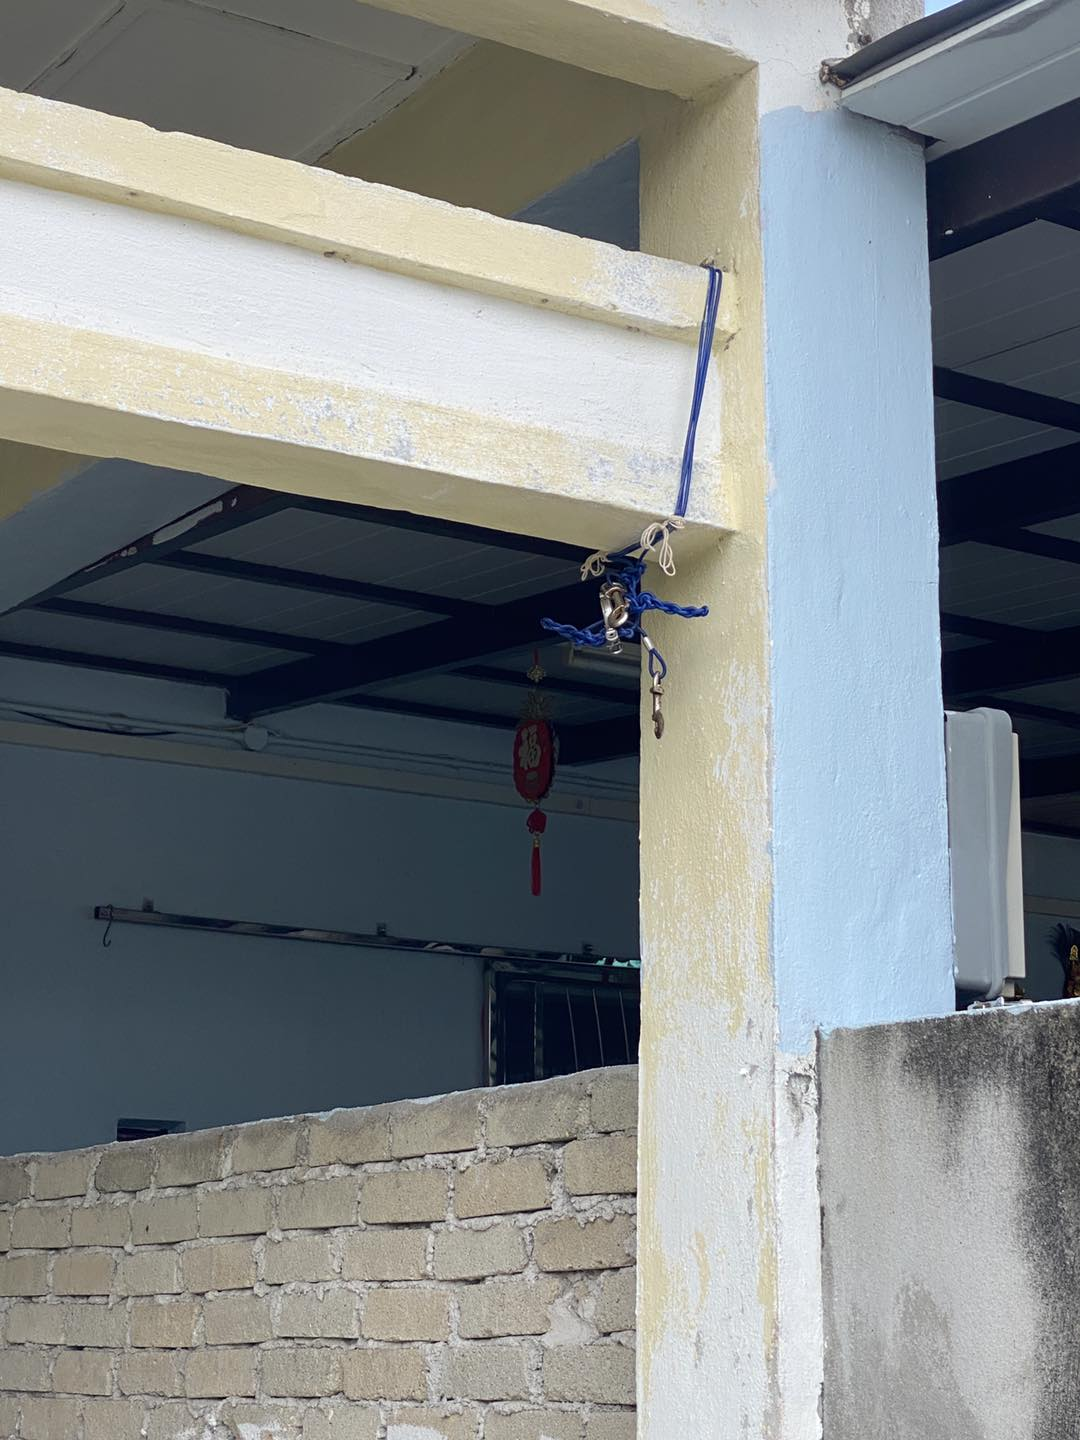 Rottweiler found hanging from a leash in penang, owner claims it was an accident